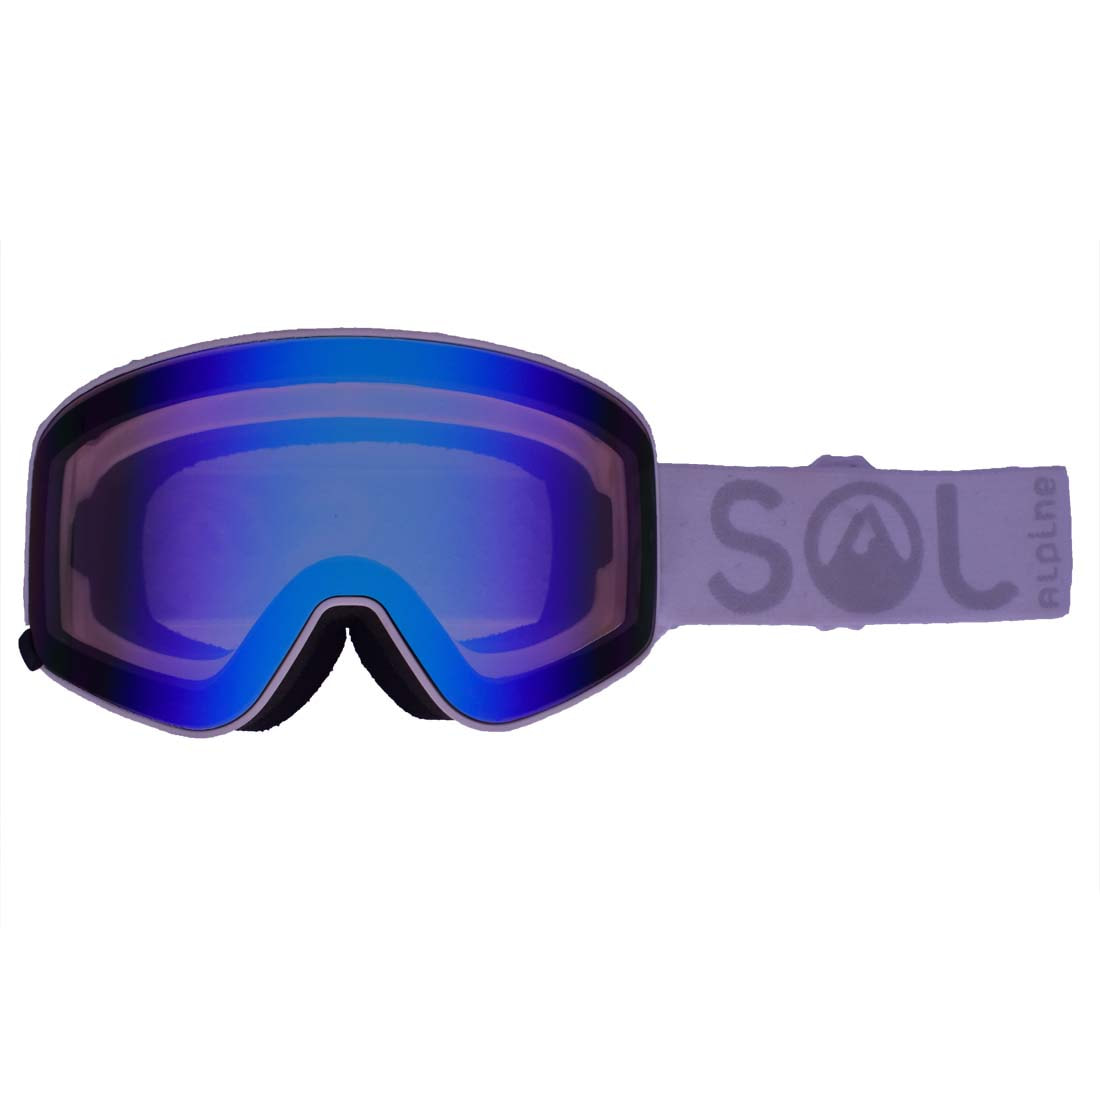 Fast-changing magnetic cylindrical ski and snowboard goggle lens system ...